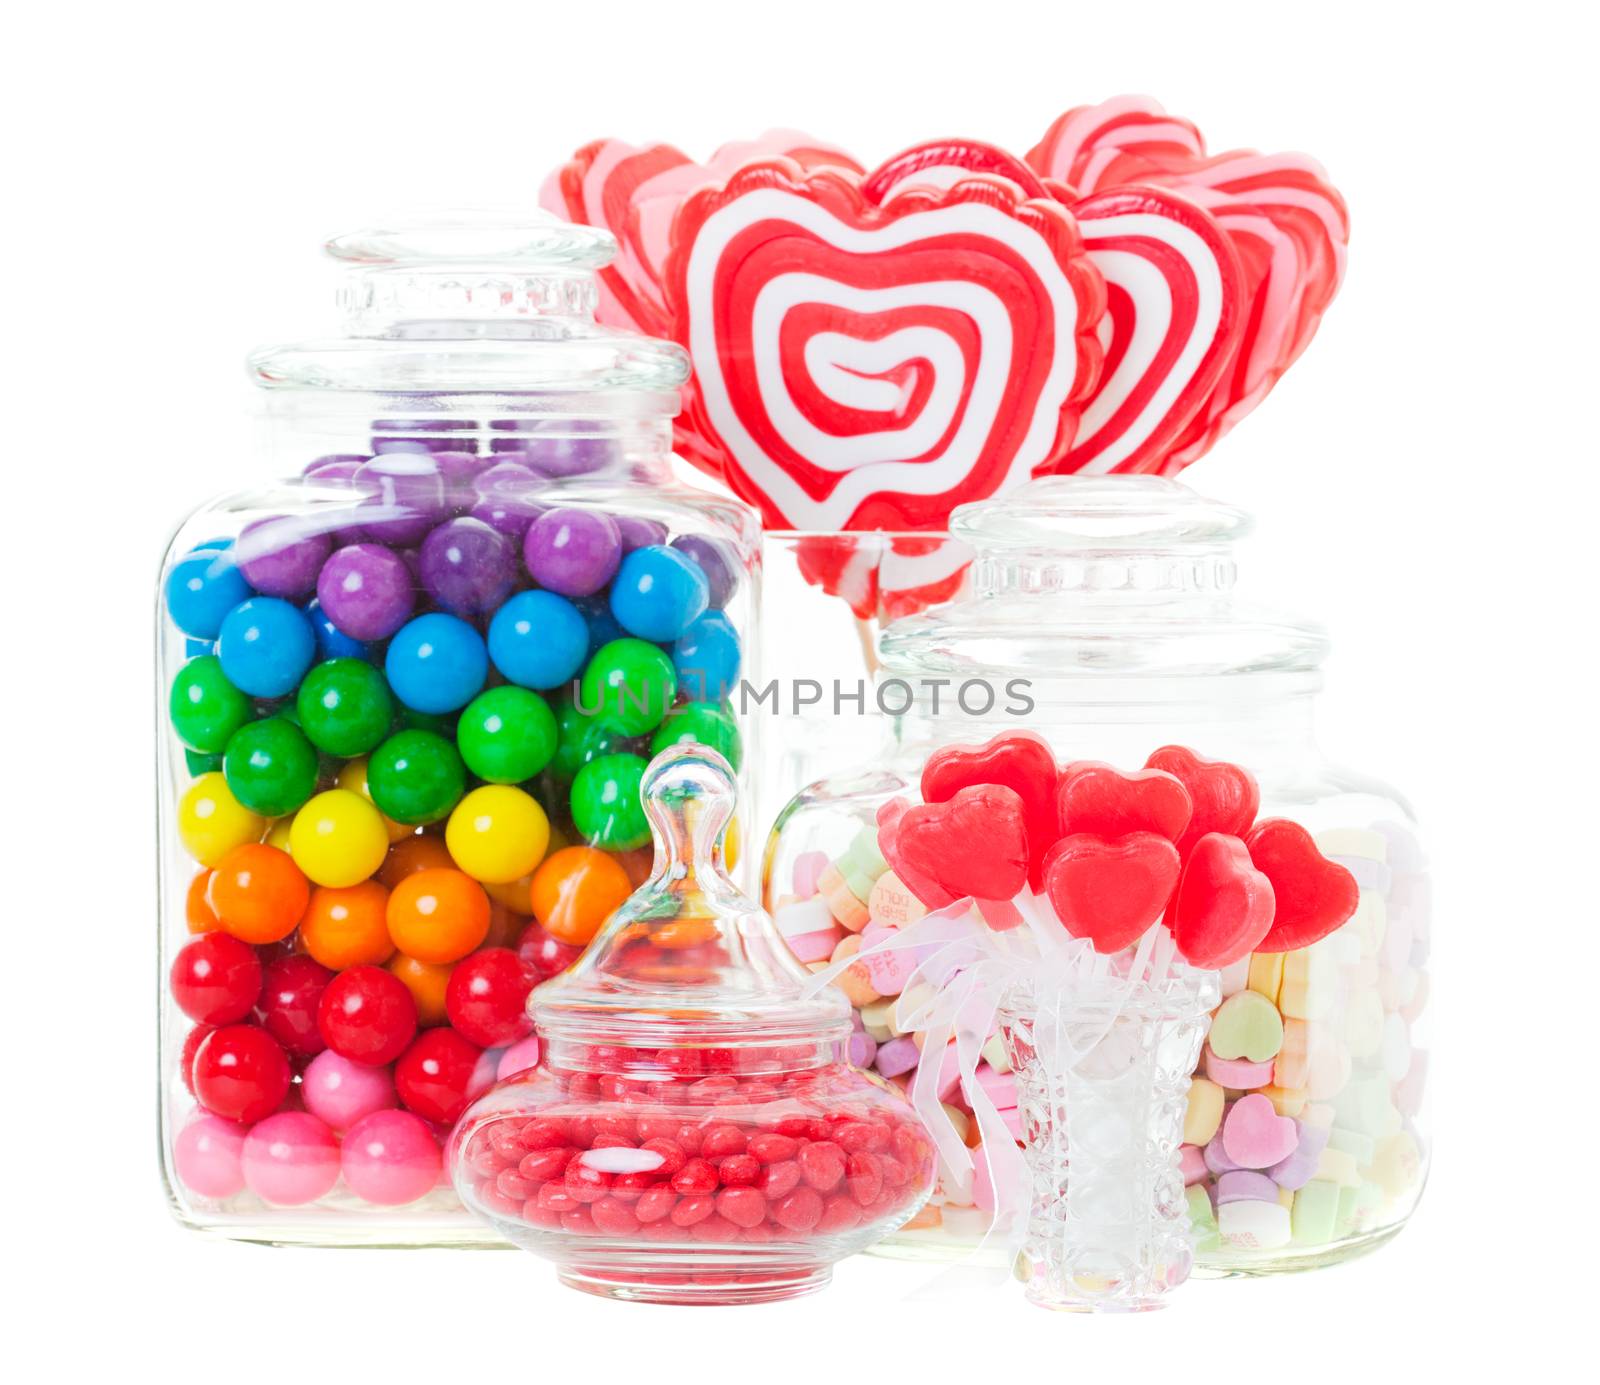 A display of various candies in glass containers.  Shot on white background.